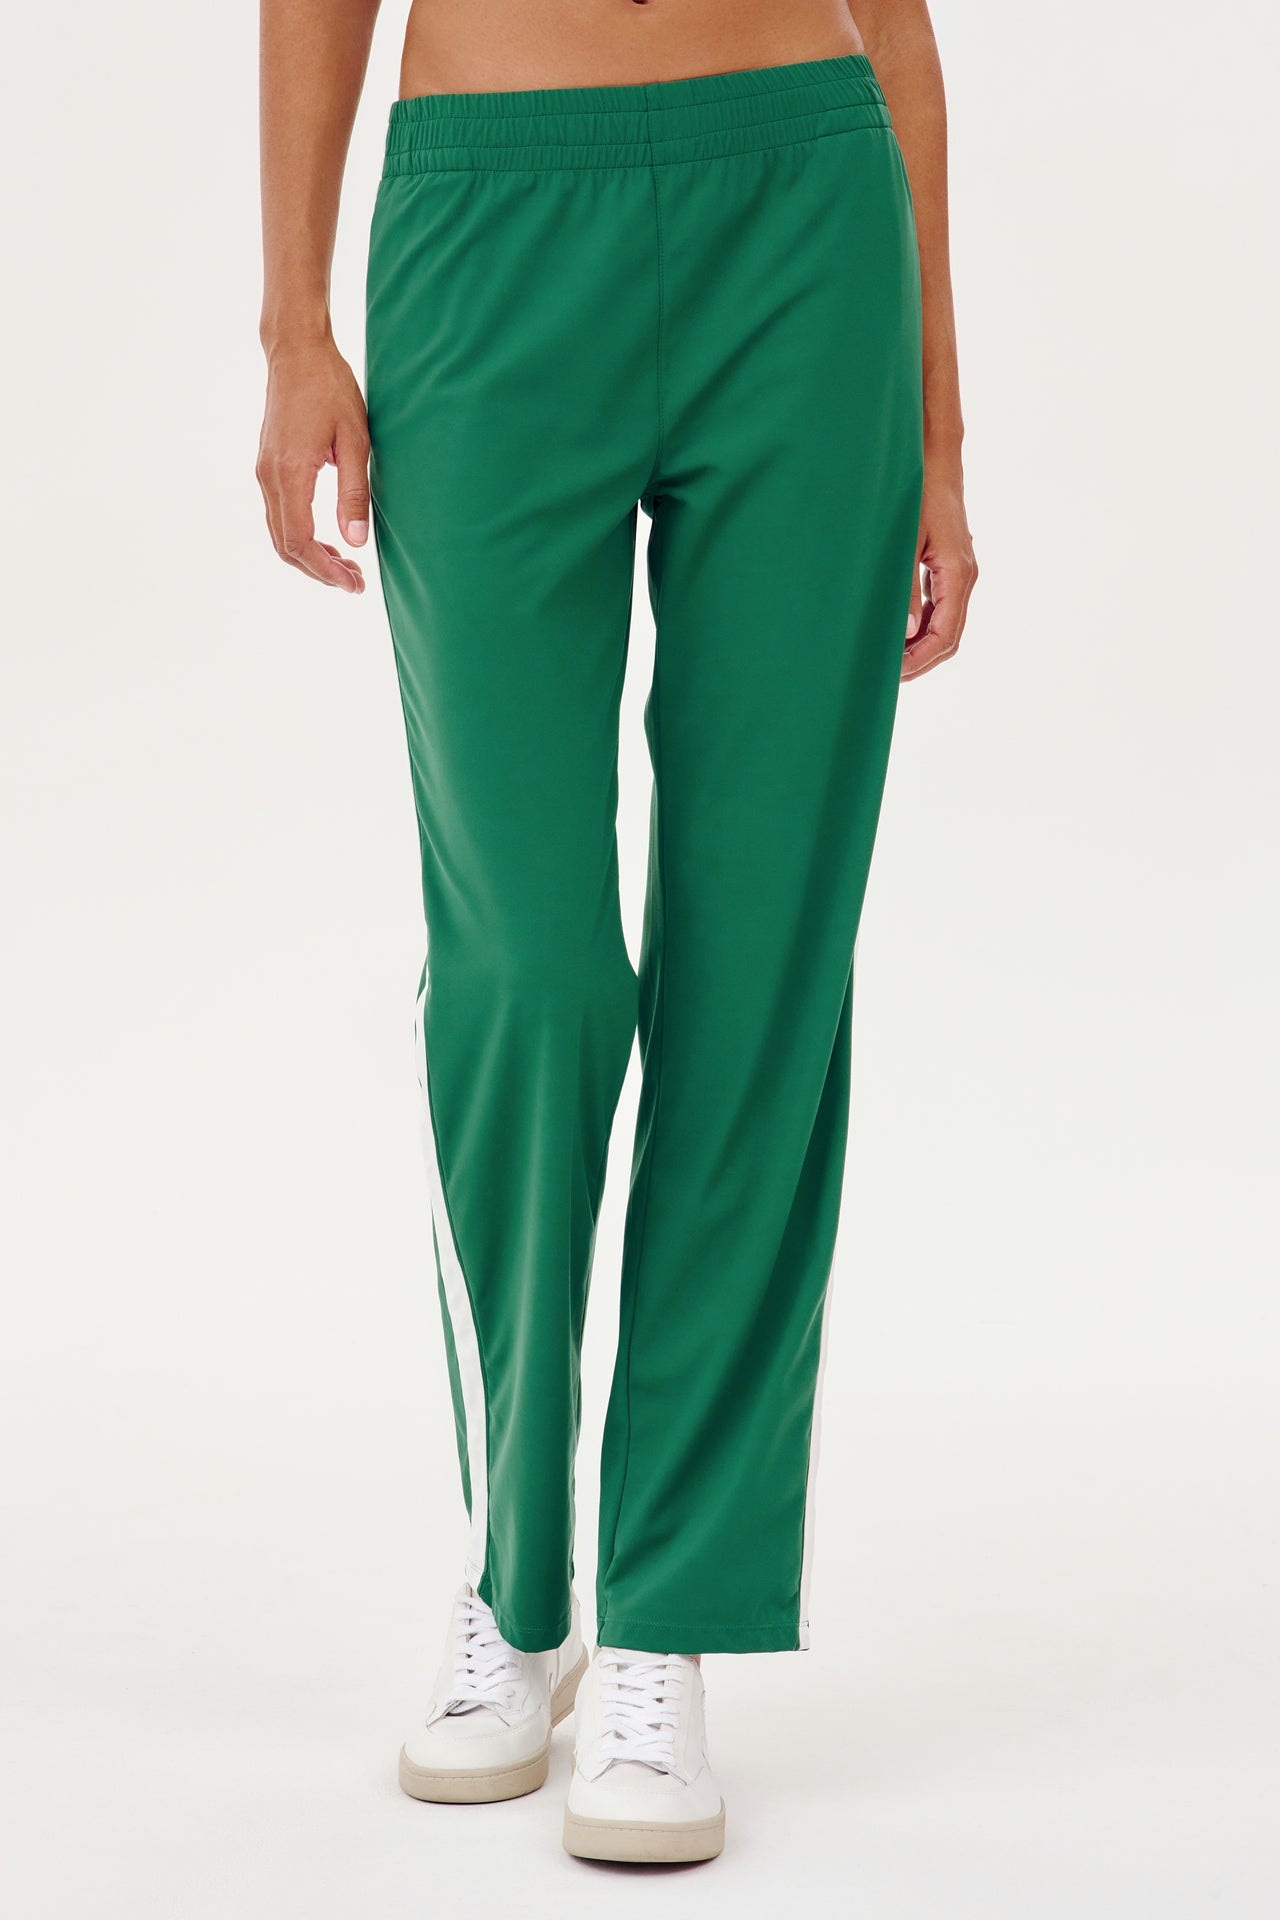 A woman wearing SPLITS59 Max Rigor Track Pant in Arugula/White for outdoor workouts.